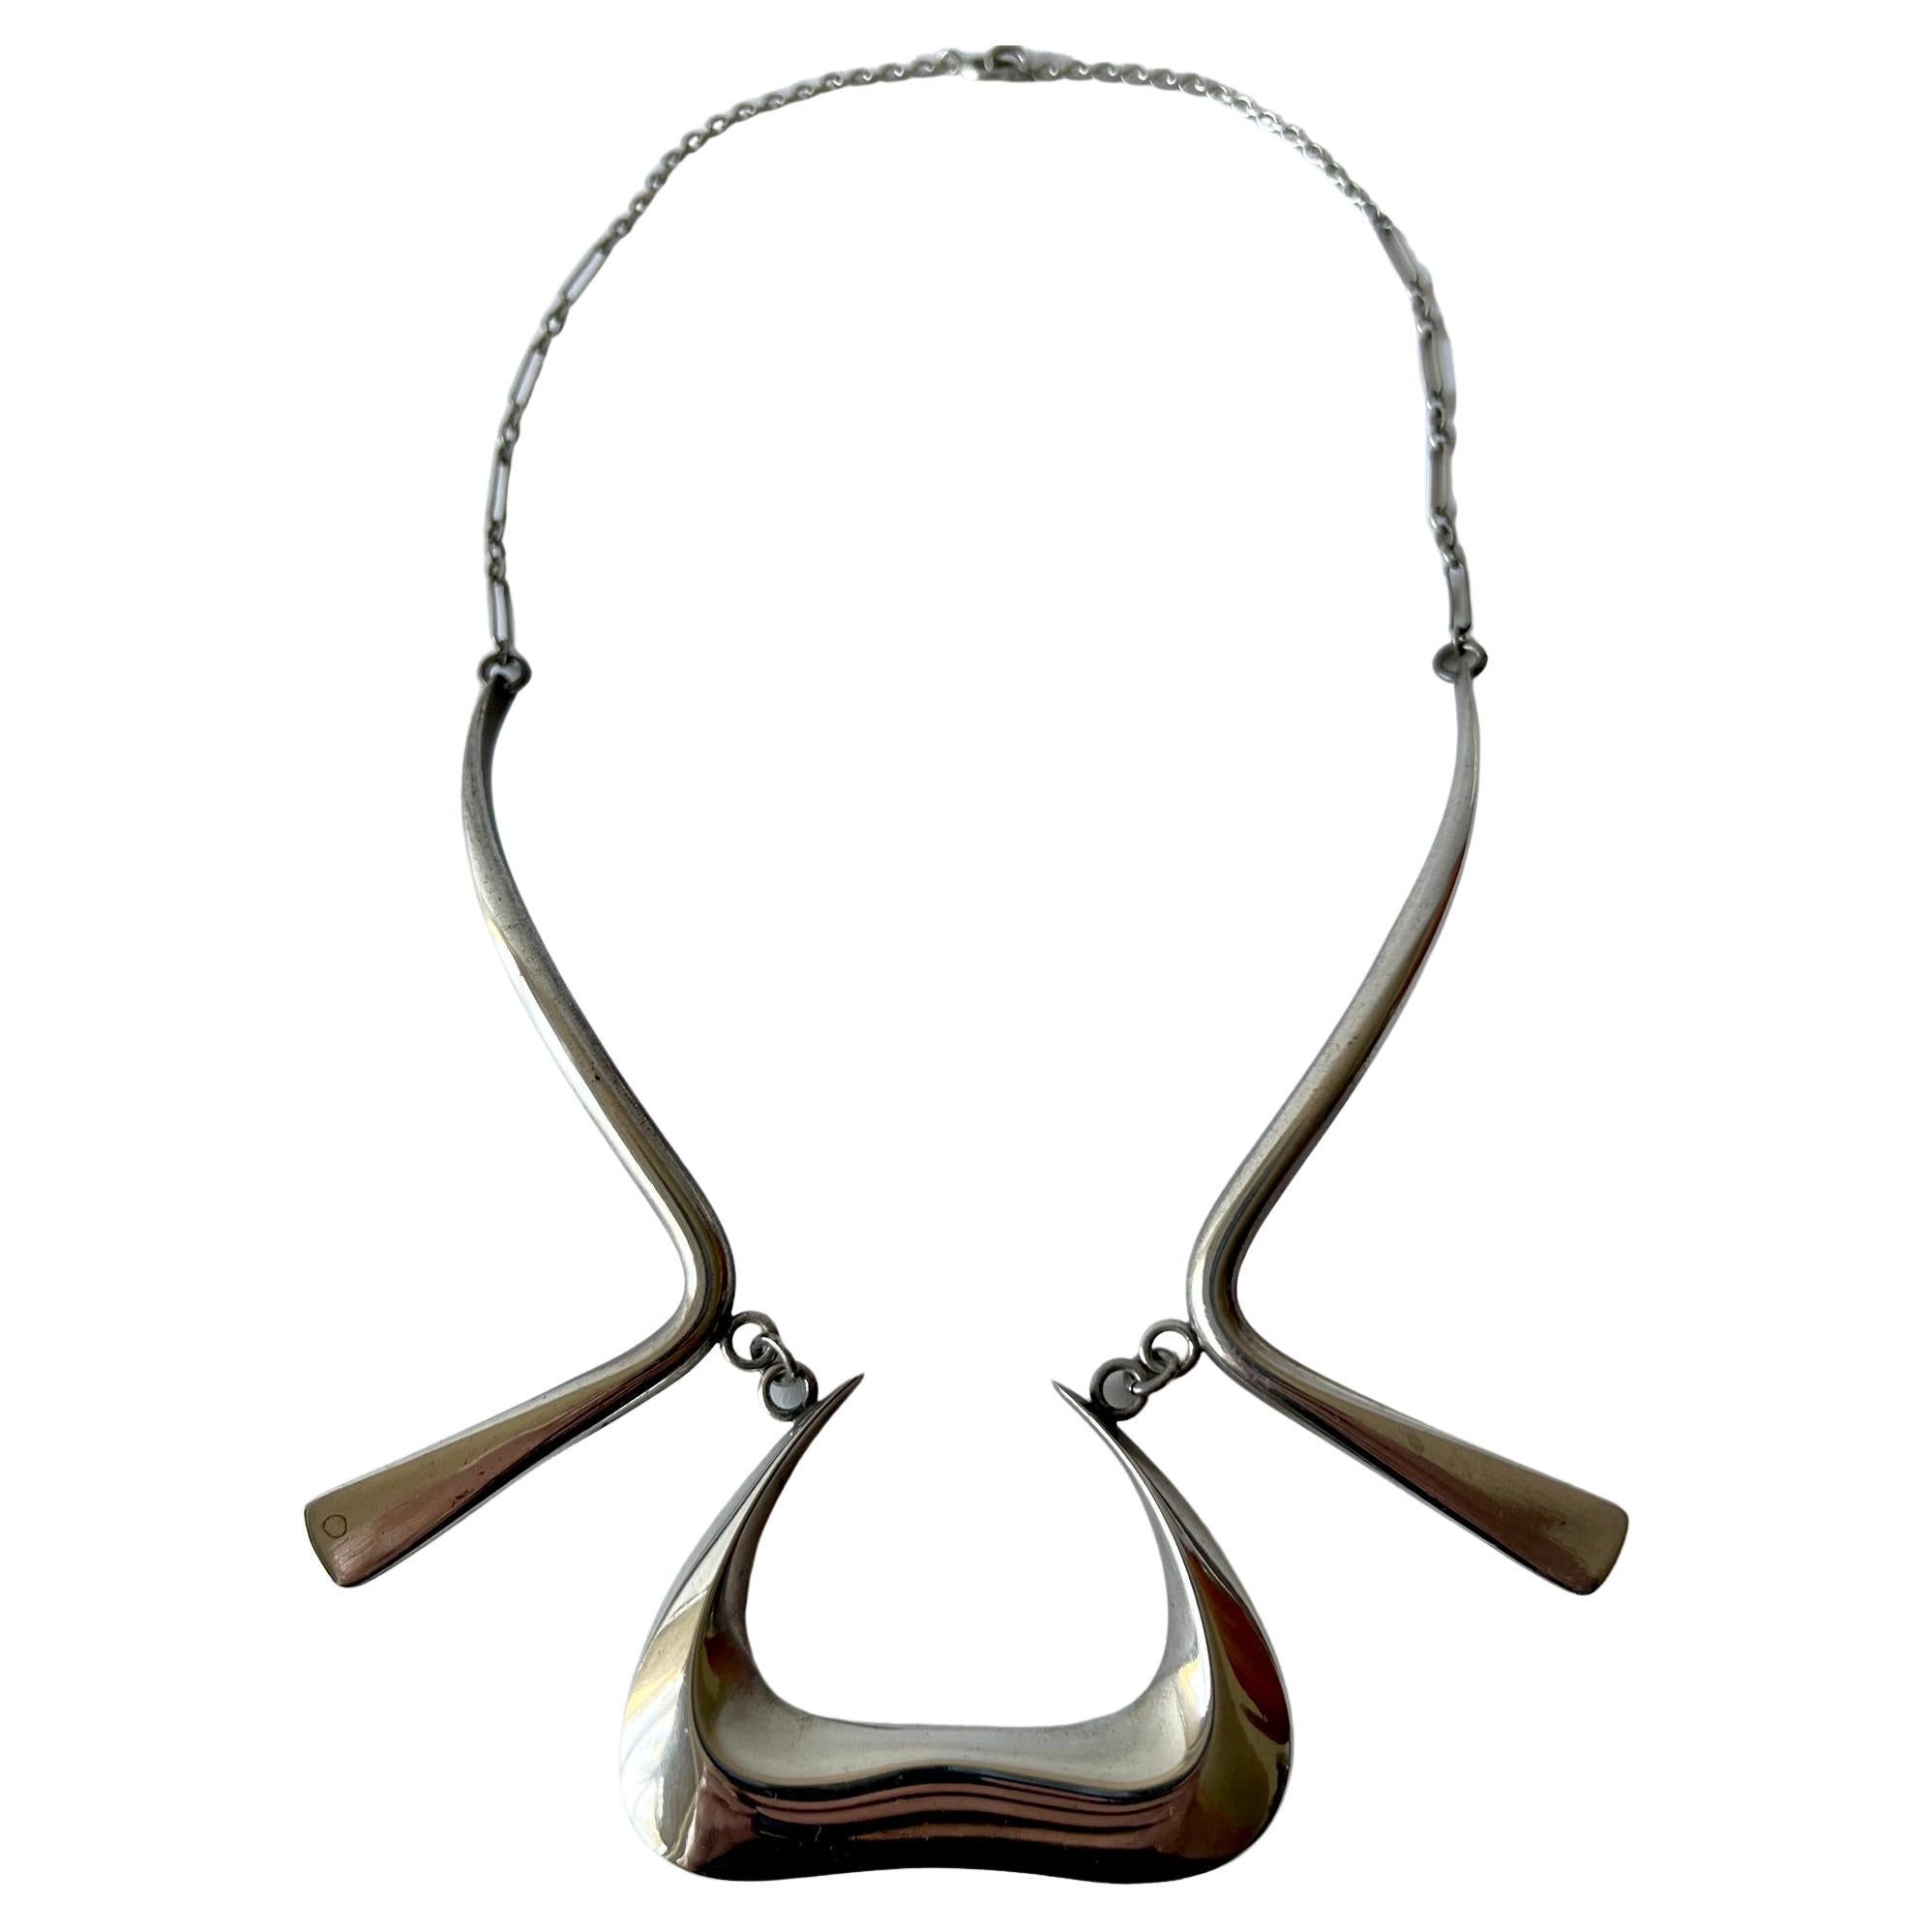 Sterling silver abstract modernist necklace created by Irvin and Bonnie Burkee, circa 1950's.  Necklace has a 17